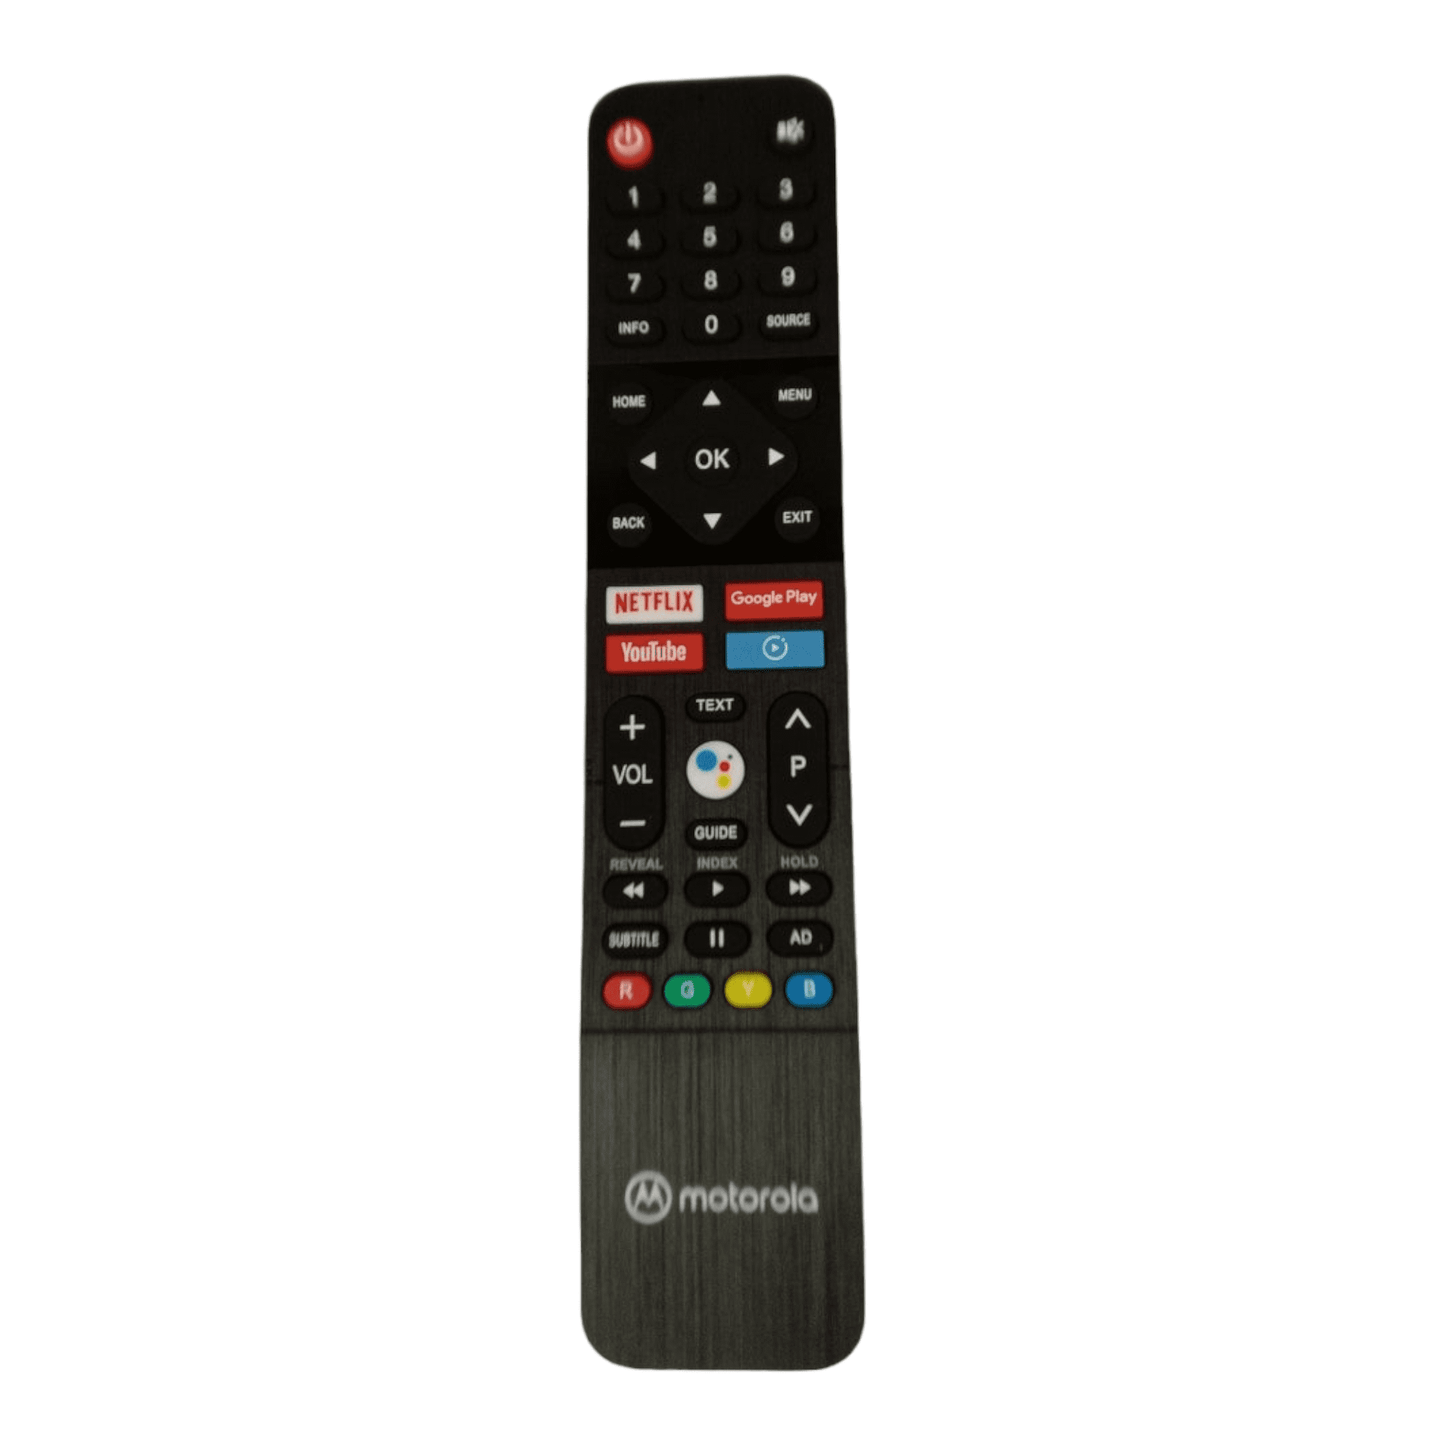 Motorola  Smart led tv remote with google voice recognition and Netflix and YouTube and Amazon prime